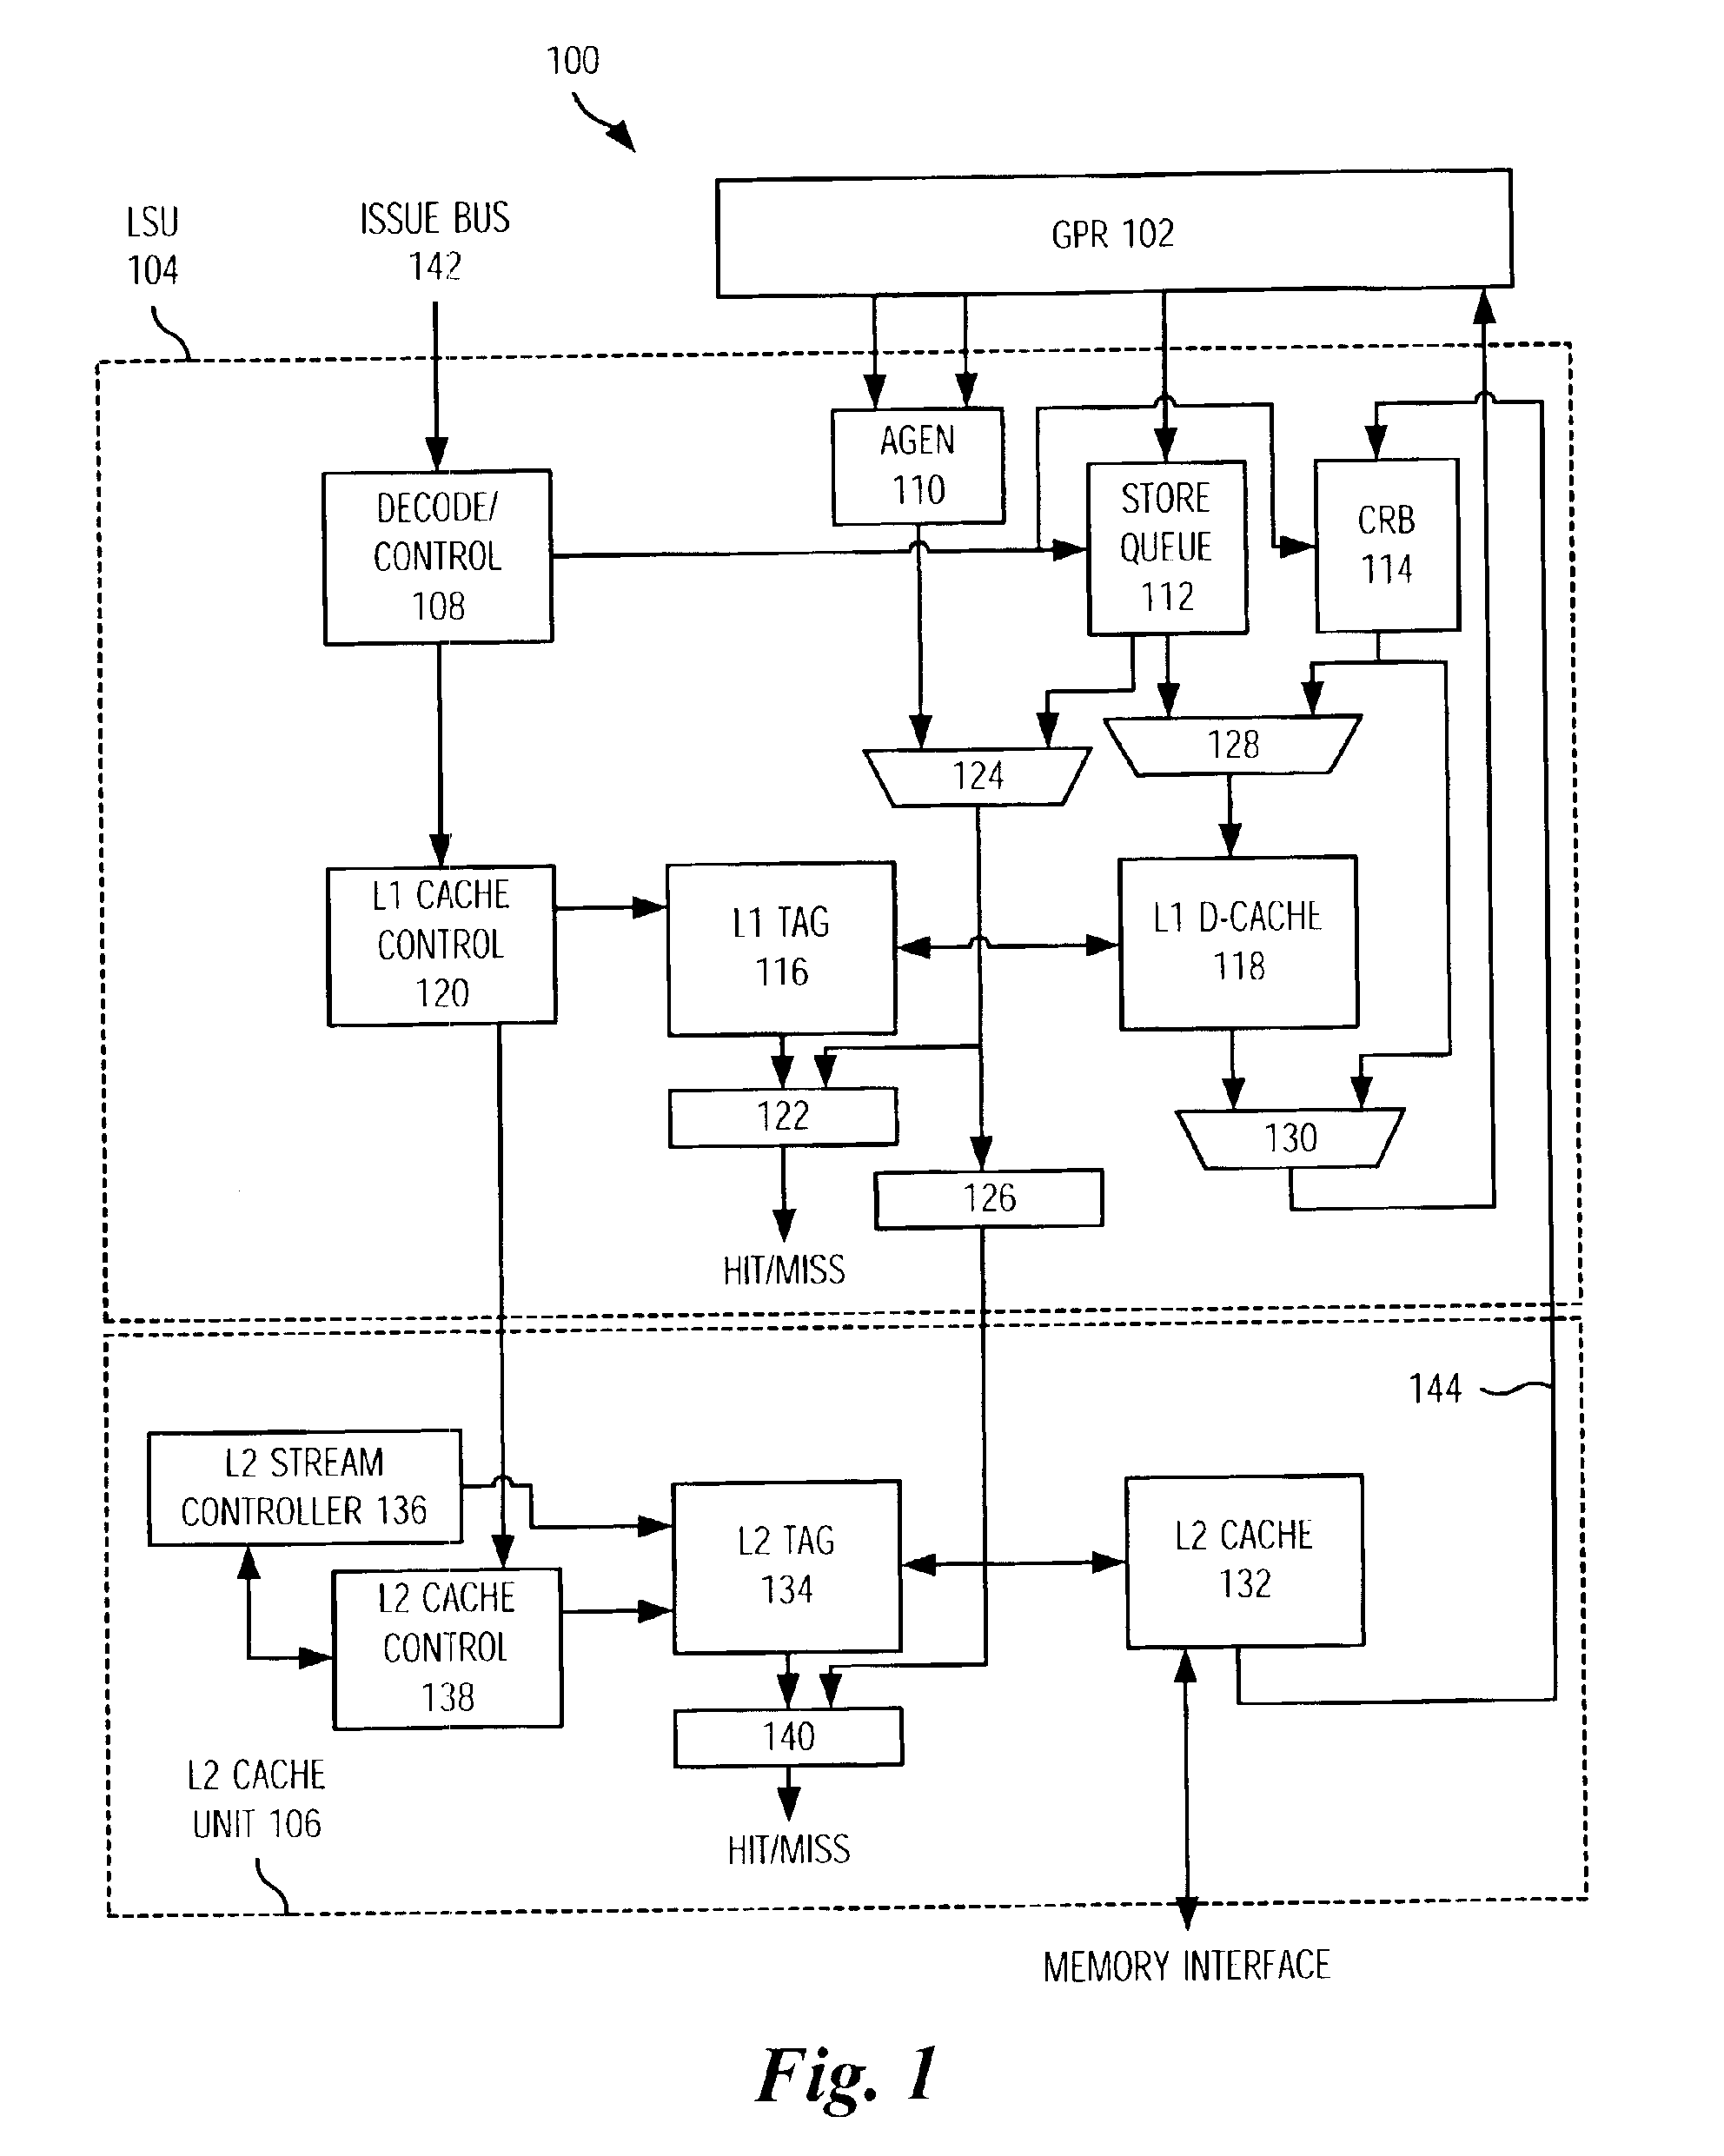 Data streaming mechanism in a microprocessor